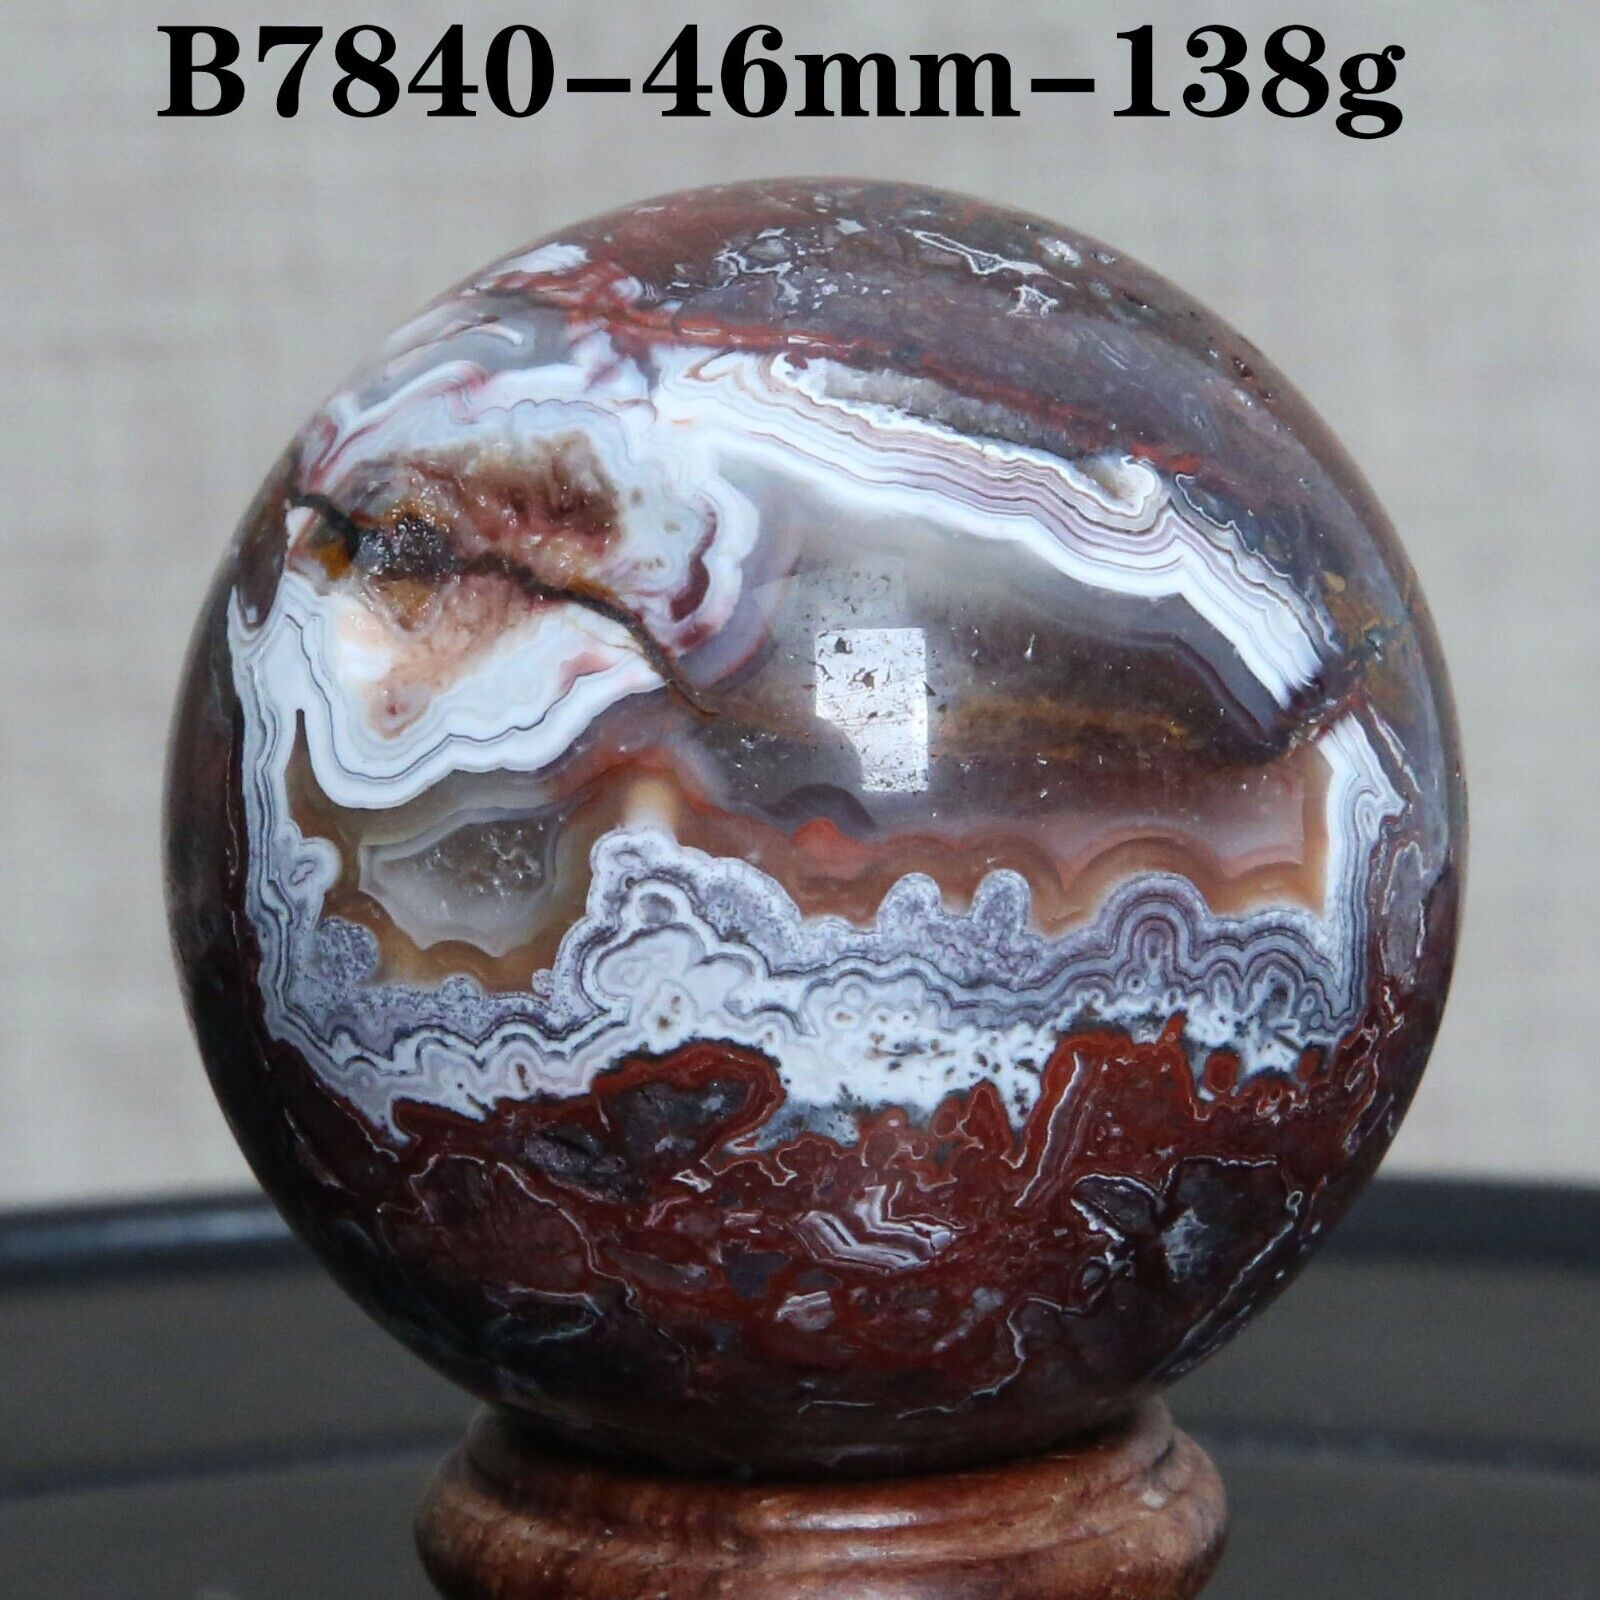 B7840-46mm-138g Natural Polished Mexico Banded Agate Crystal Sphere Ball Healing